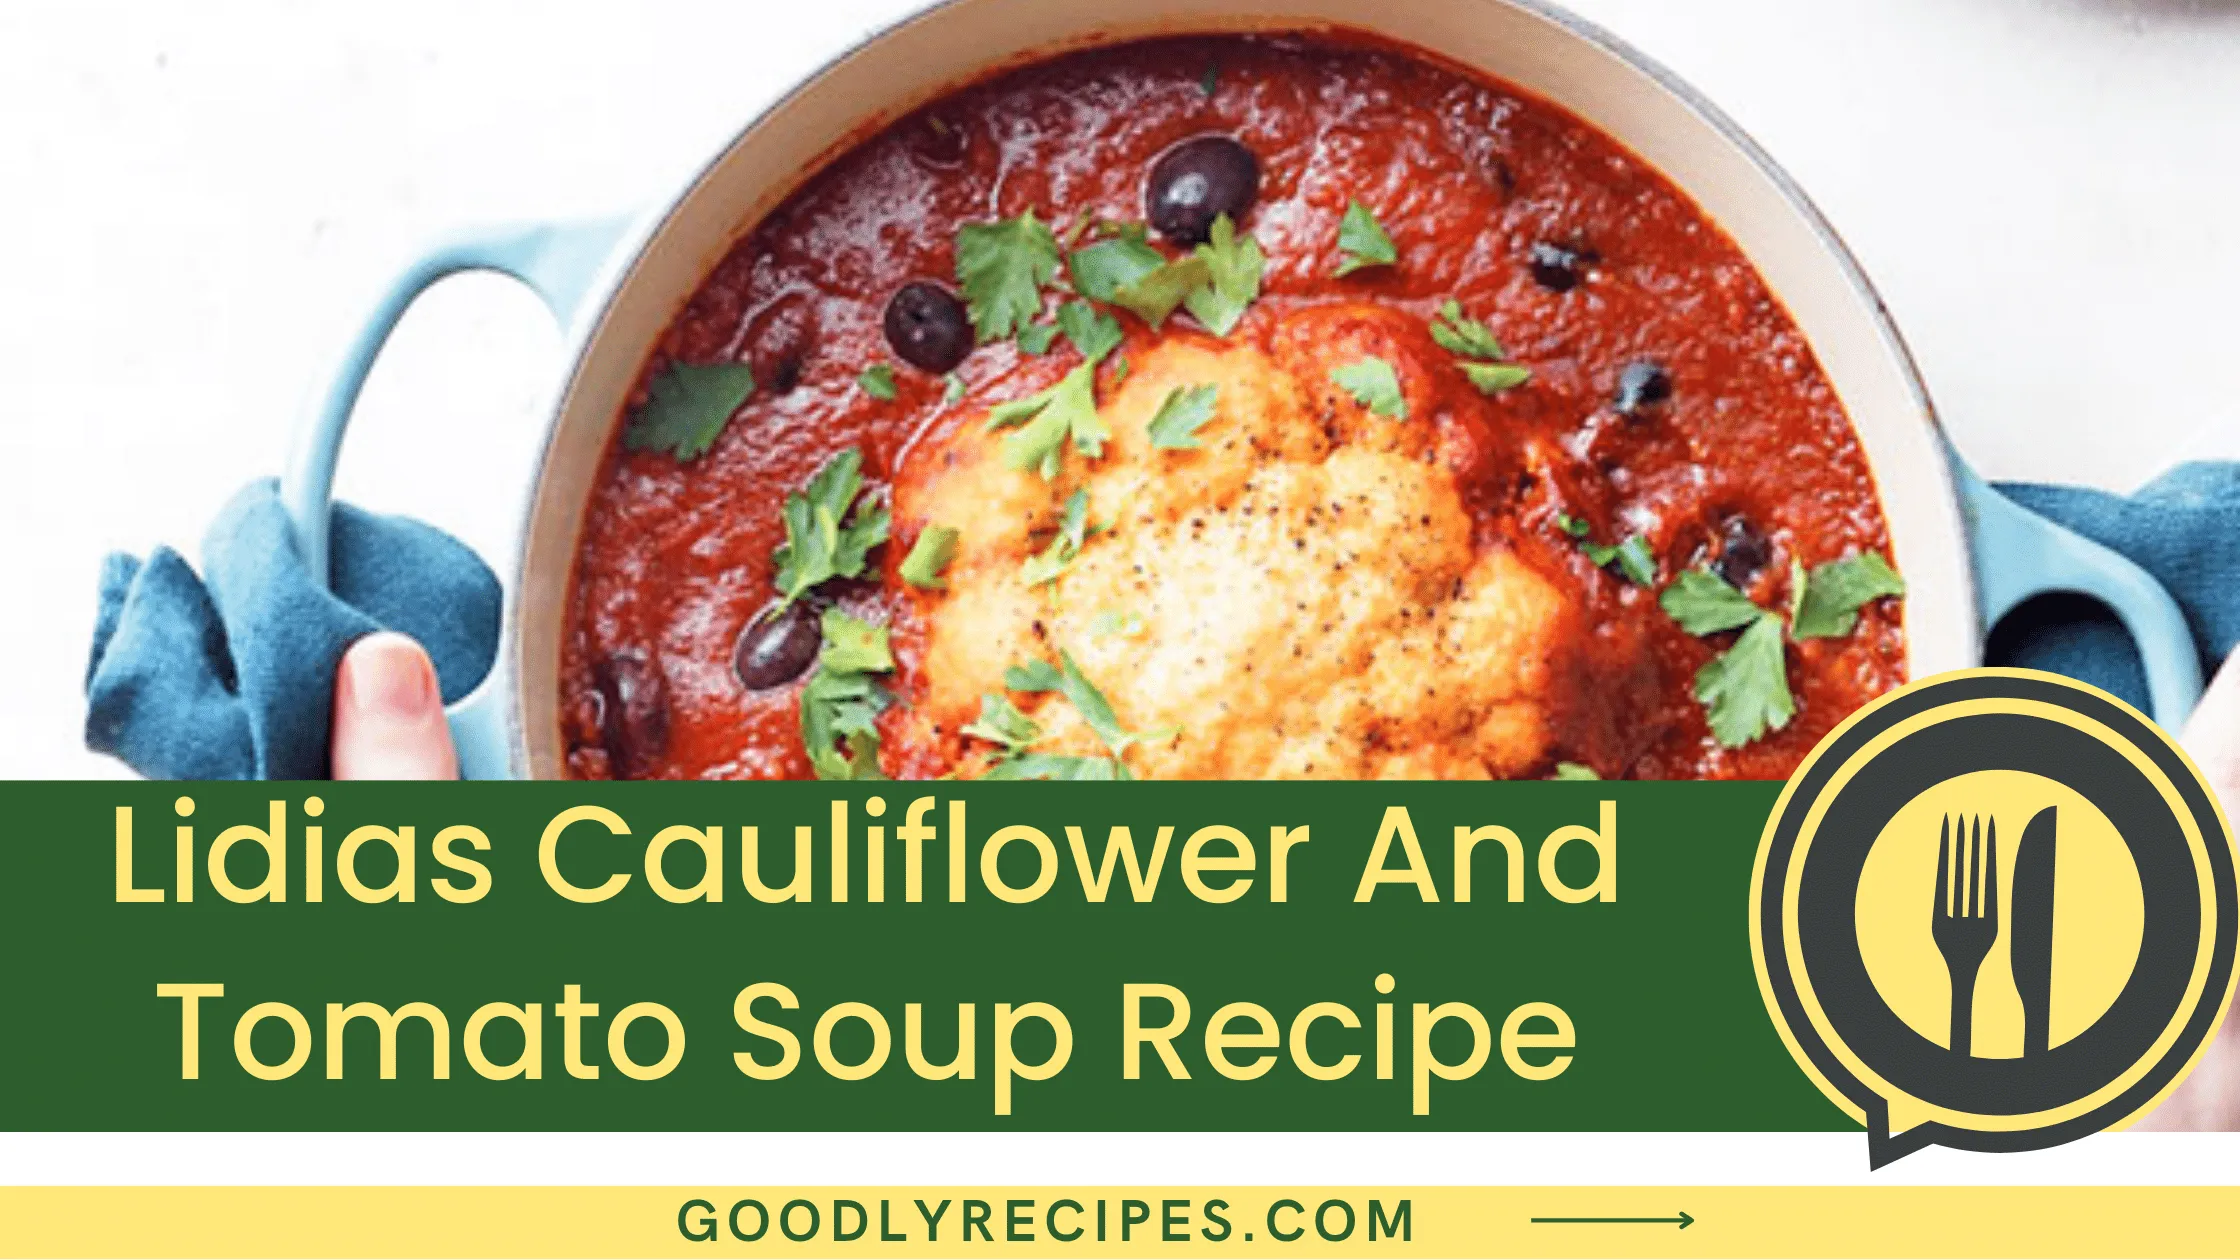 What Is Lidia's Cauliflower And Tomato Soup?